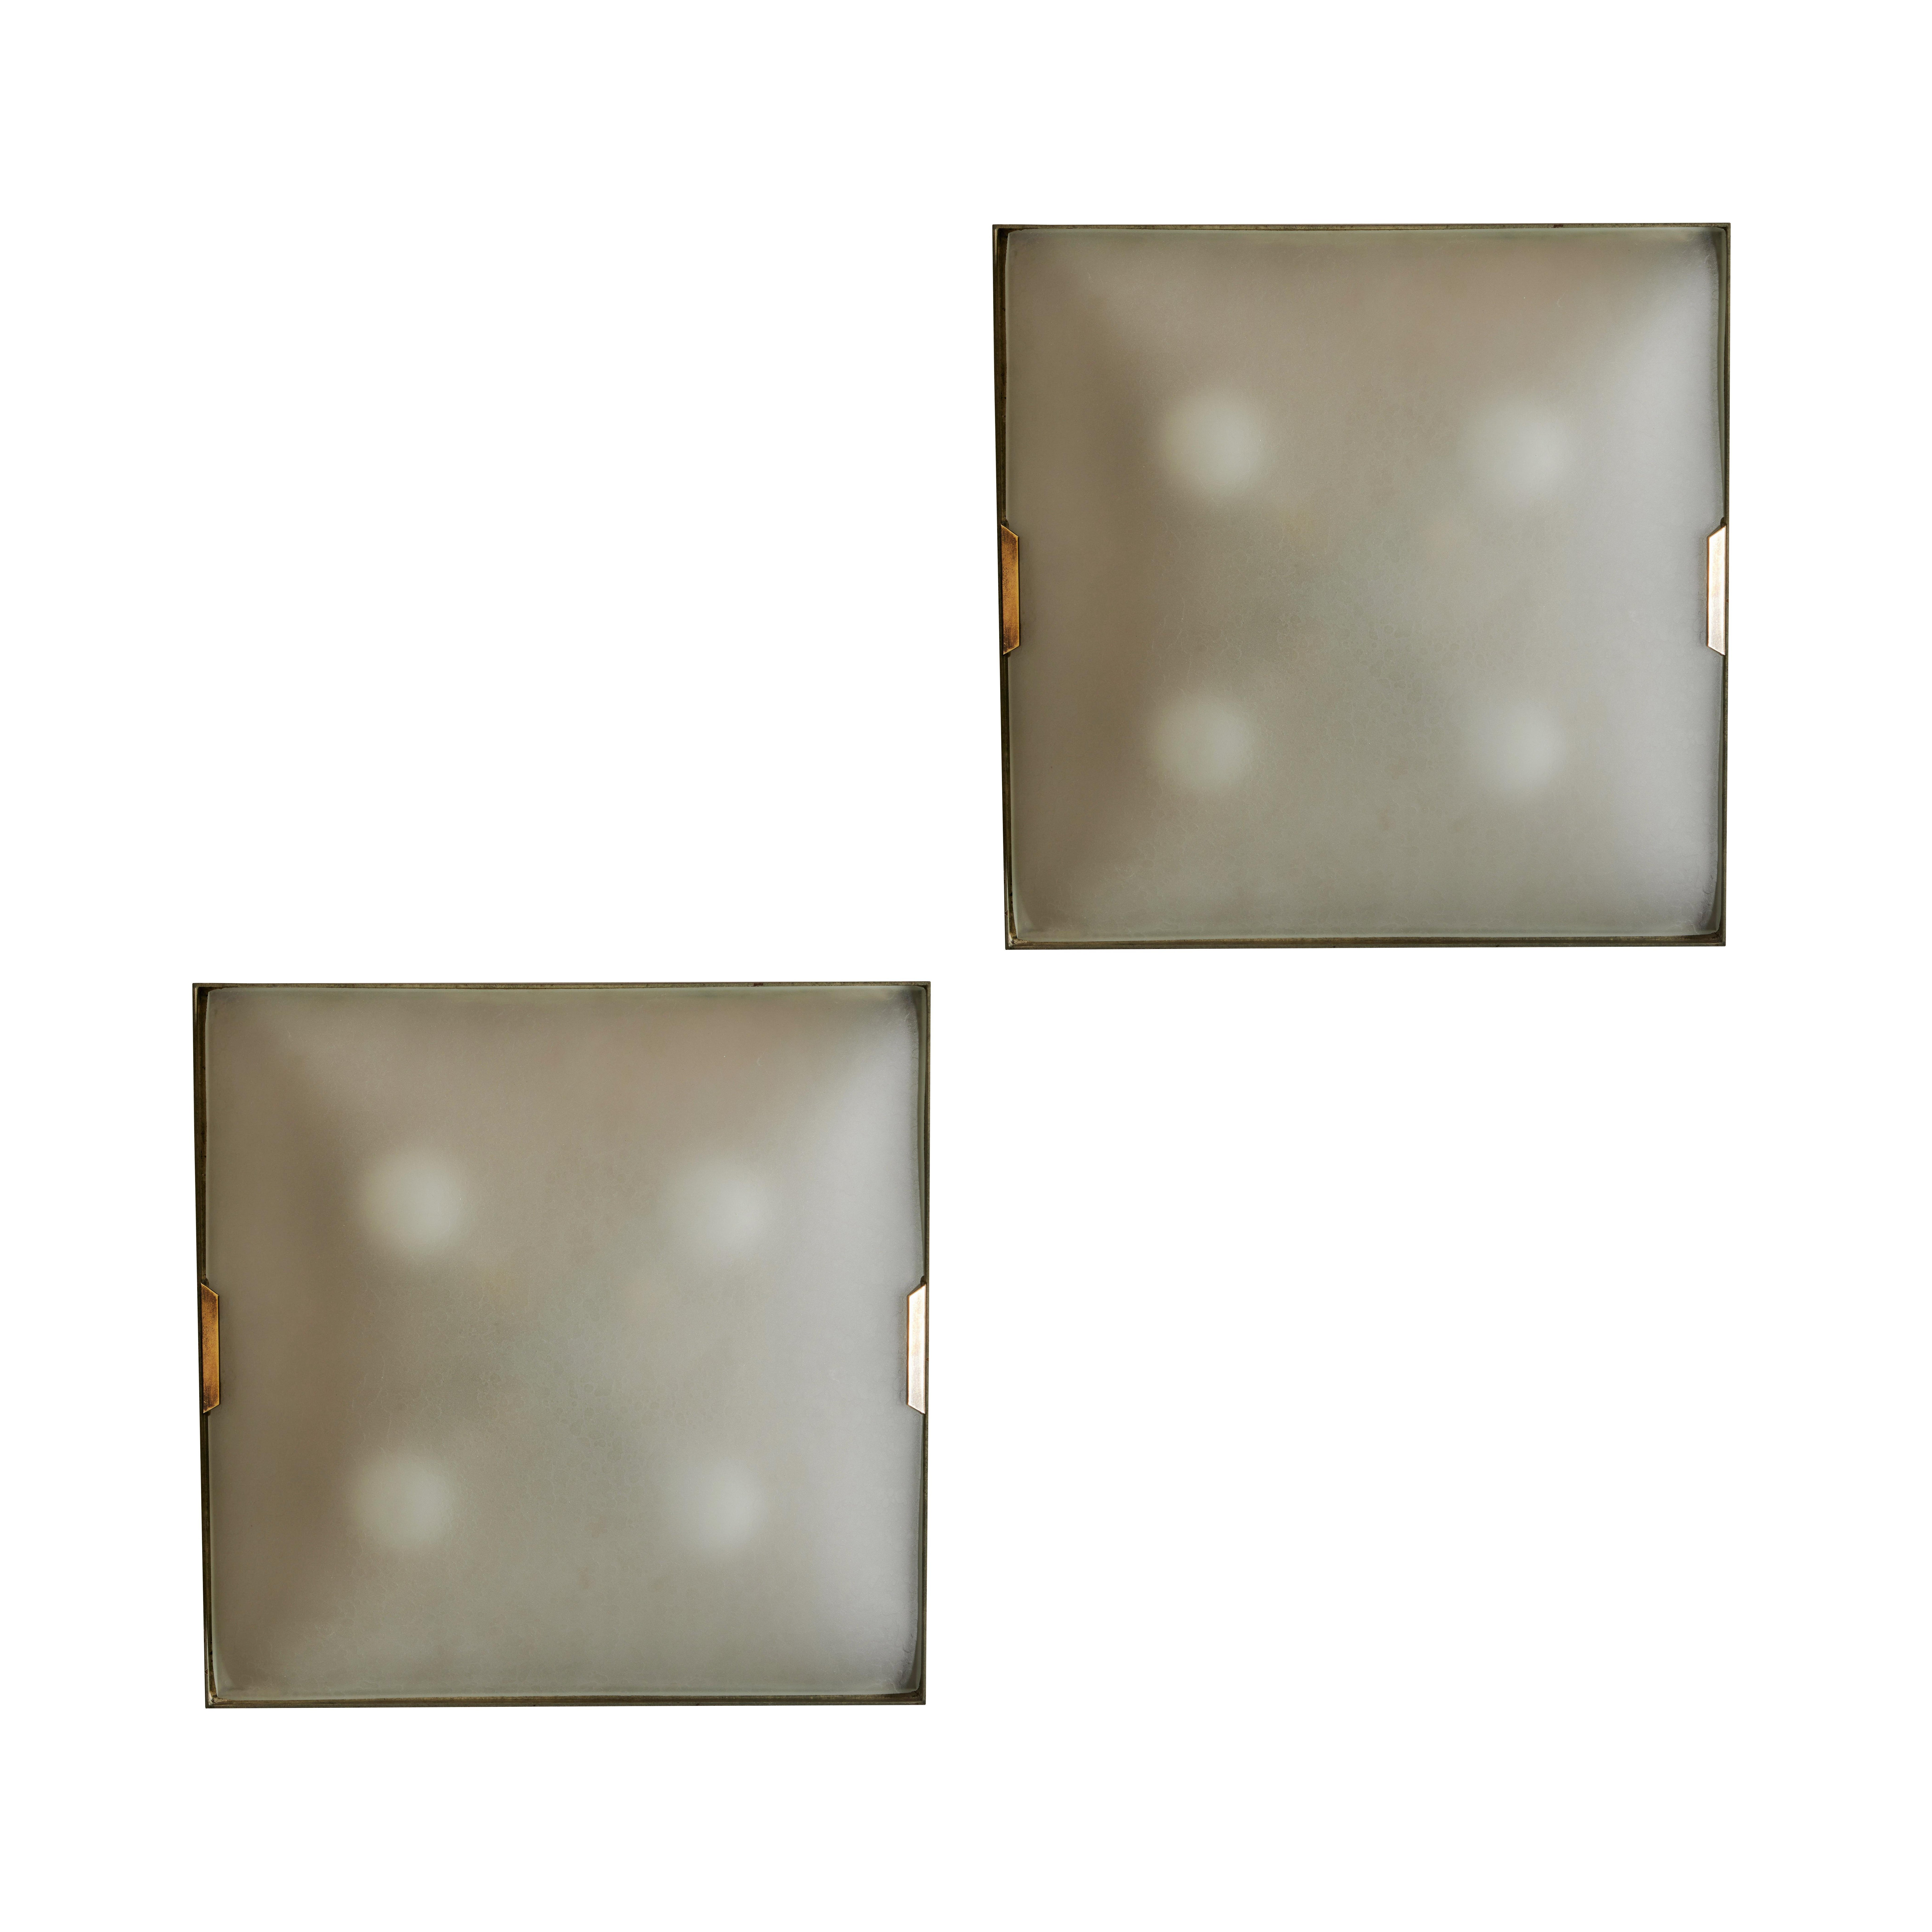 Single flush mount wall / ceiling light by Stilnovo. Glass, brass, painted aluminum. Wired for U.S. standards. We recommend four E14 40w maximum candelabra bulbs. Bulbs not included. QTY: 1 AVAILABLE!